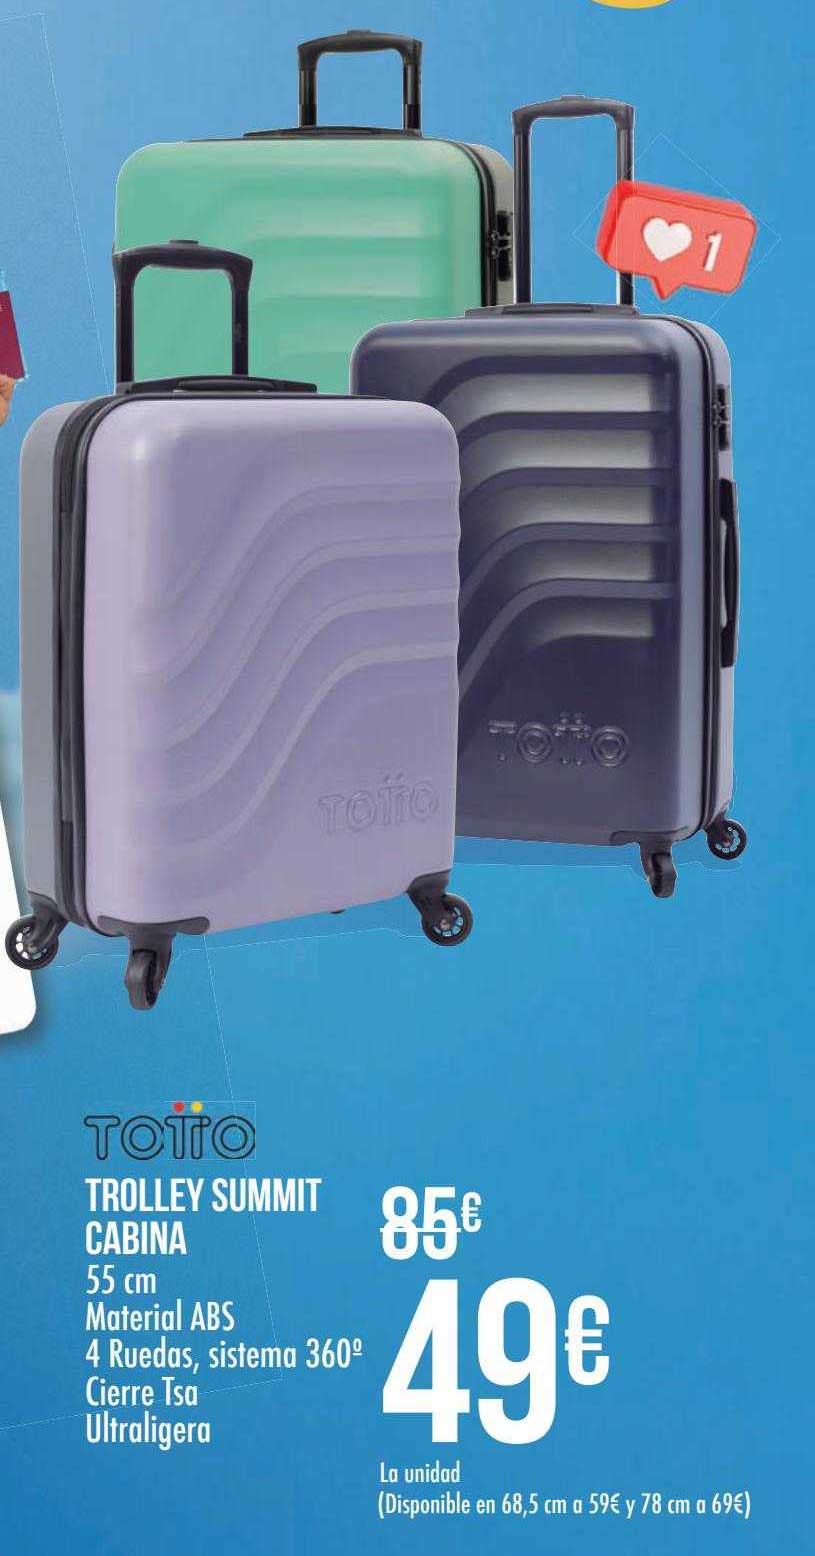 Carrefour Totto Trolley Summit Cabina